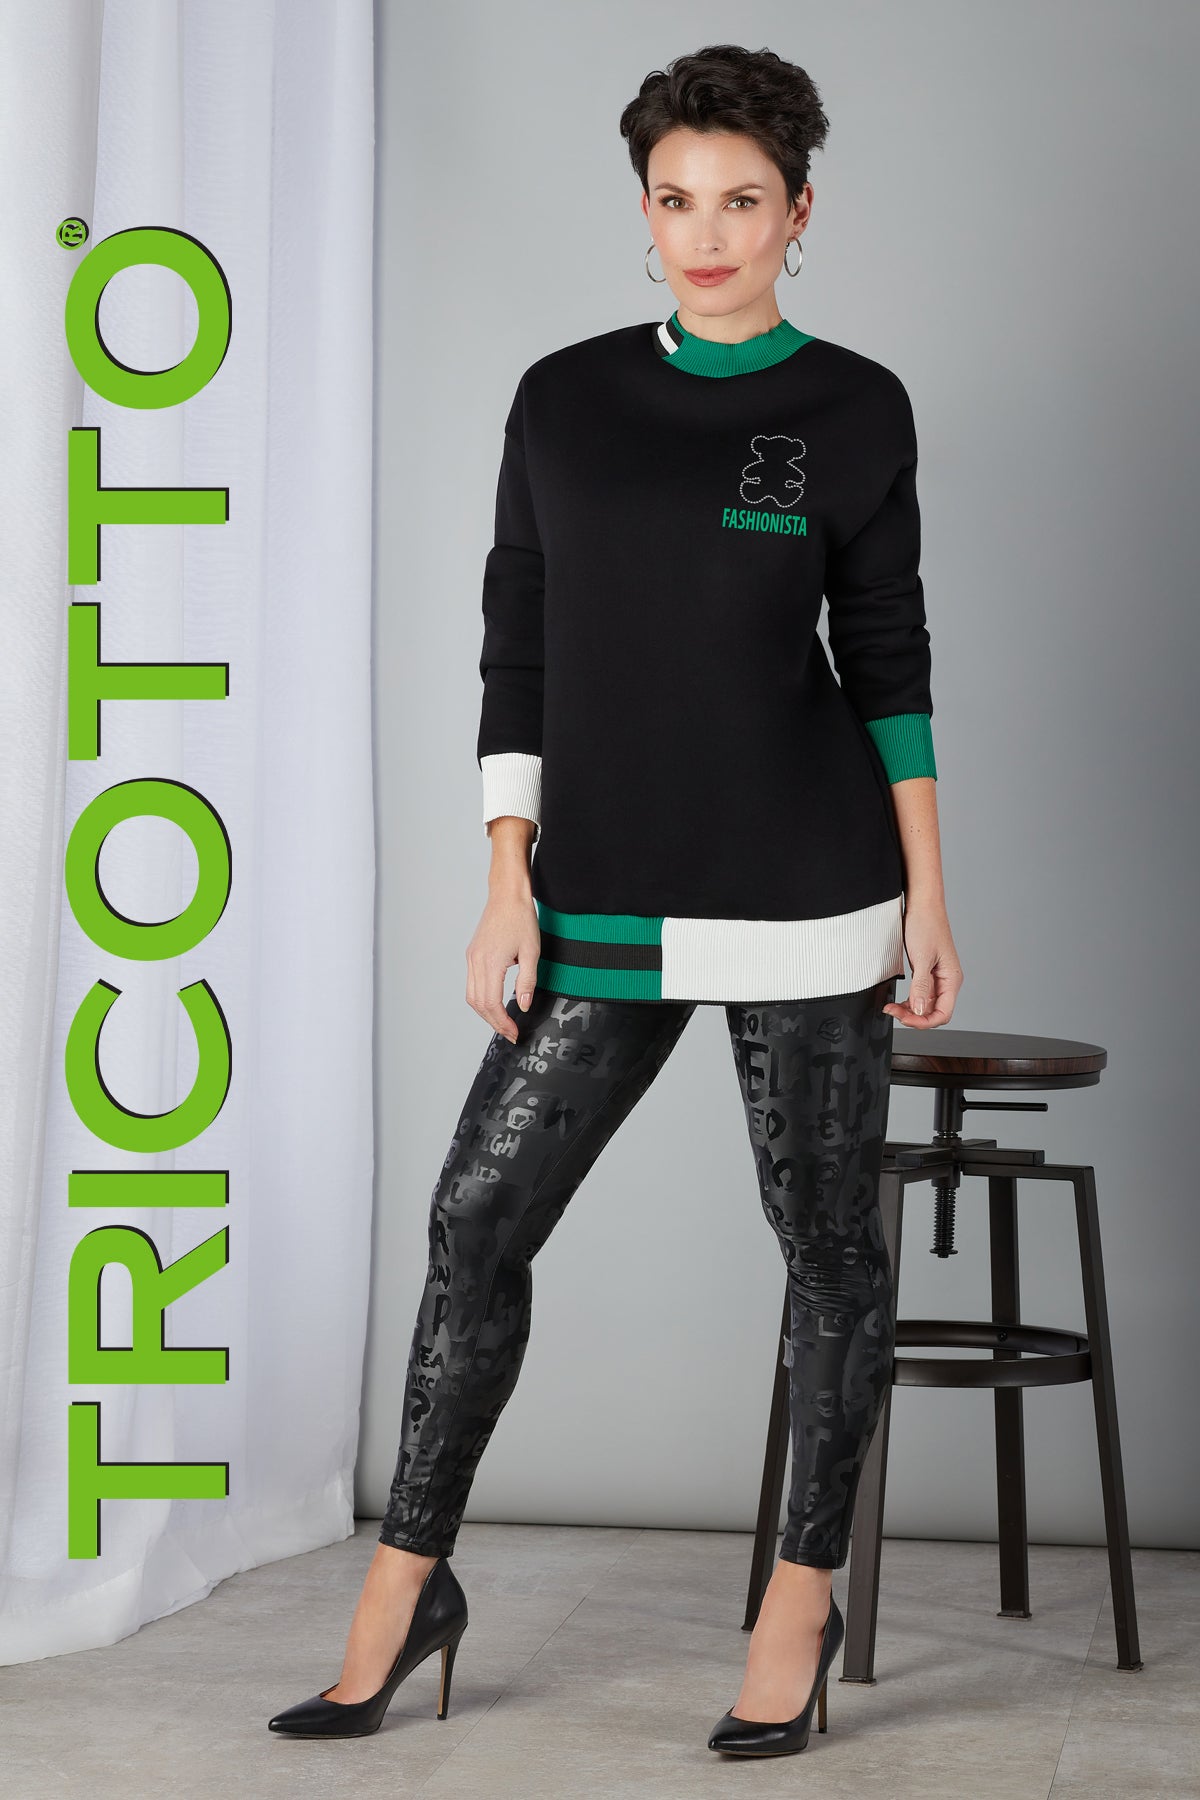 Tricotto Sweaters Online-Buy Tricotto Sweaters Online-Tricotto Online Sweater Shop-Tricotto Clothing Montreal 